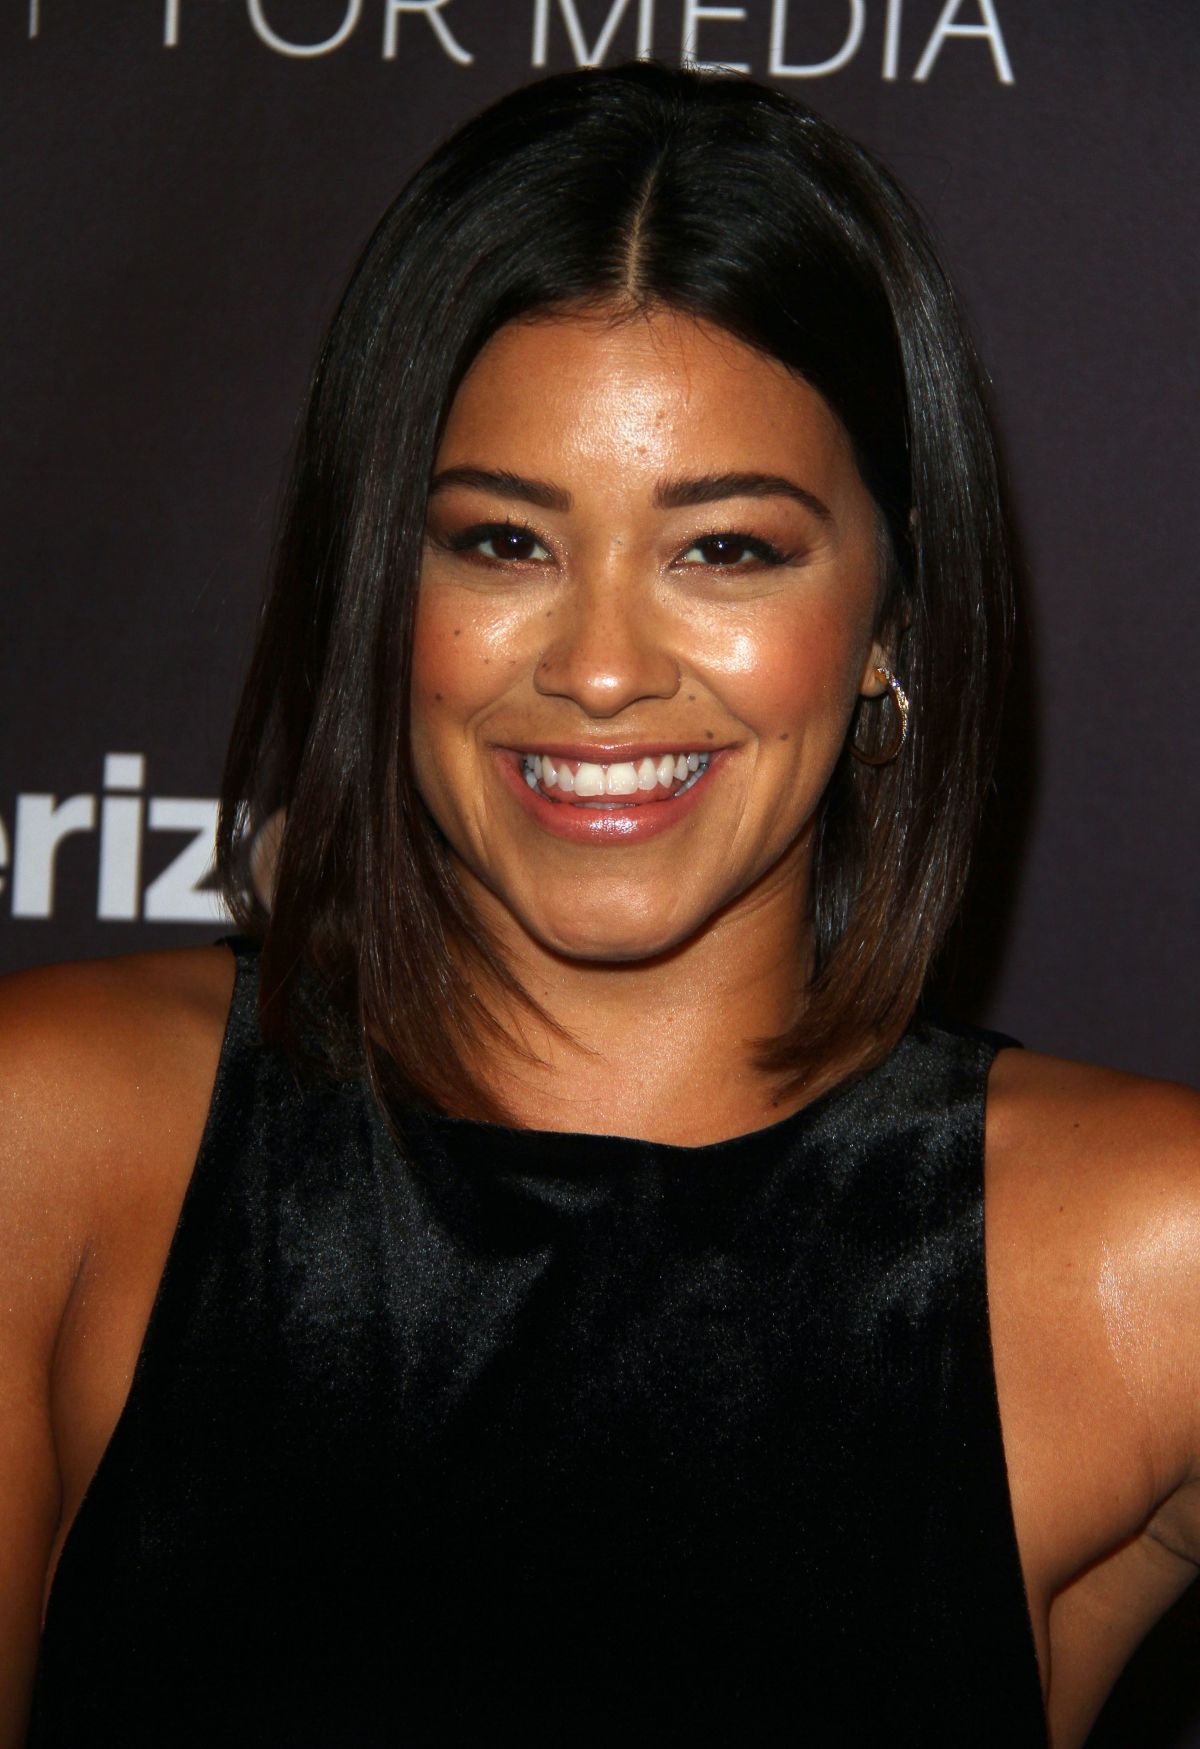 GINA RODRIGUEZ at Media’s Hollywood Tribute to Hispanic Achievements in Tel...